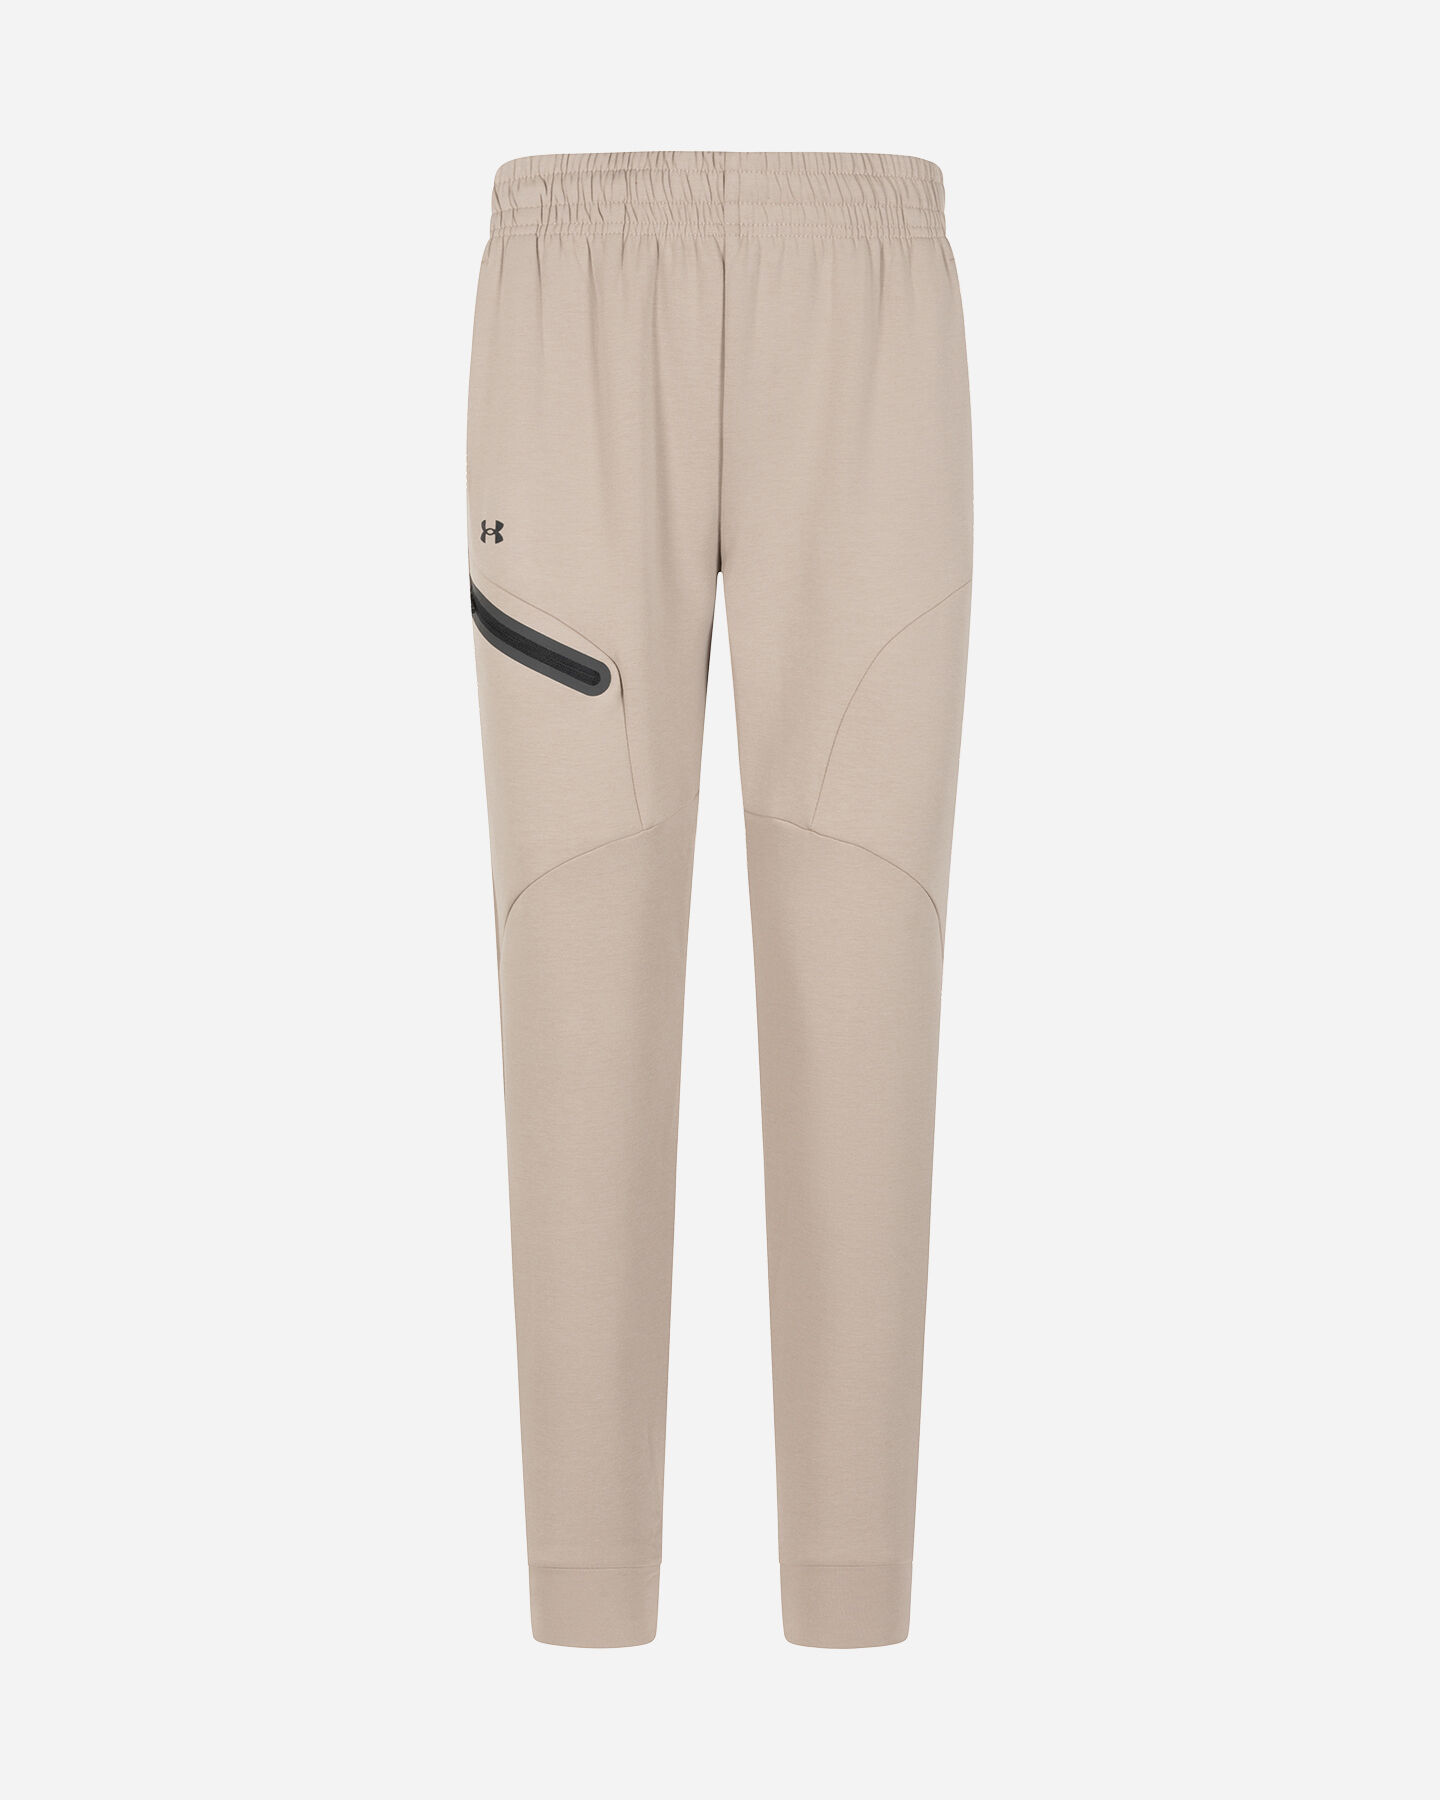  Pantalone UNDER ARMOUR UNSTOPPABLE FLC W S5649433|0203|XS scatto 0